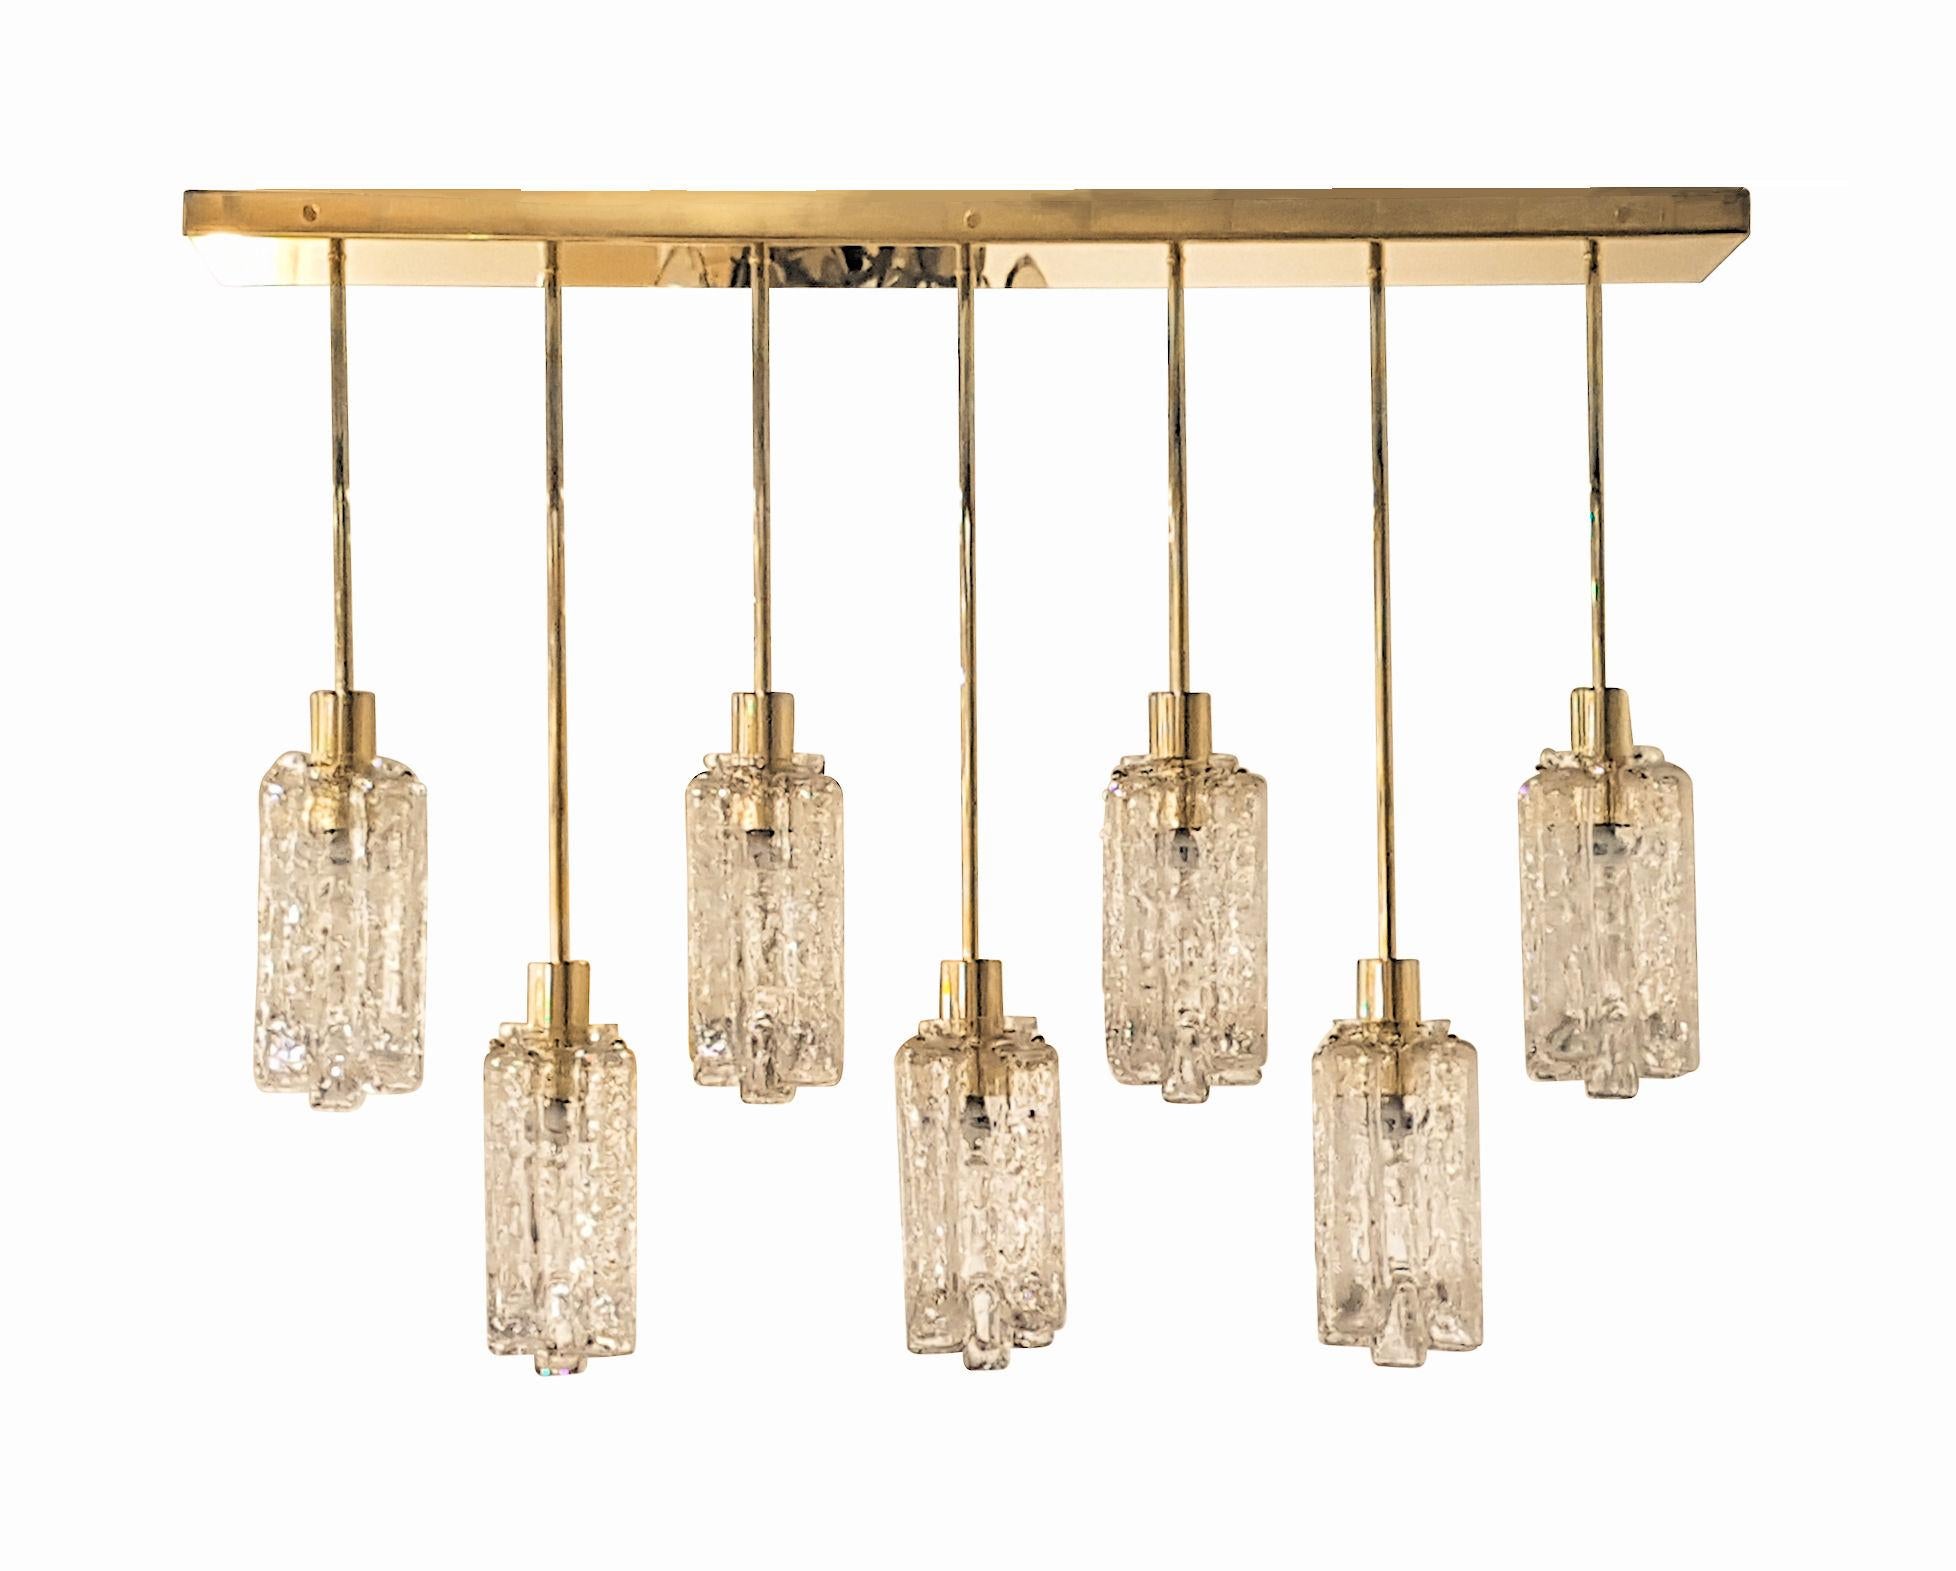 Large custom made rectangular Kalmar clear Murano glass pendants and brass flushmount ceiling light.
Frame made to order: 7 weeks lead time maximum.
D'Lightus limited edition: 140 pieces of Mid-Century Modern glasses only.
The Murano textured and